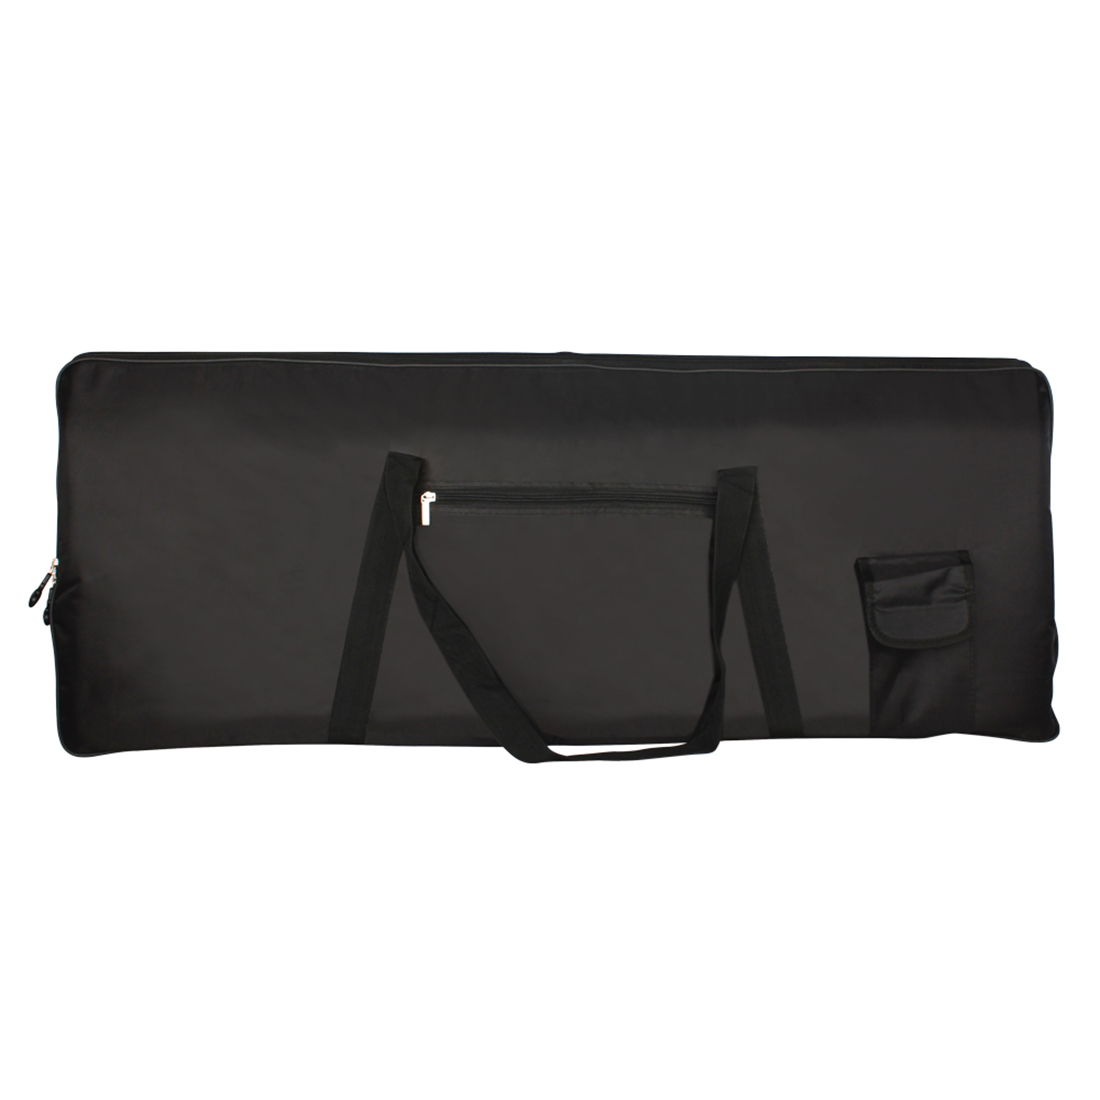 SLADE Portable Waterproof Piano Oxford Fabric Bag for 76 Keyboards